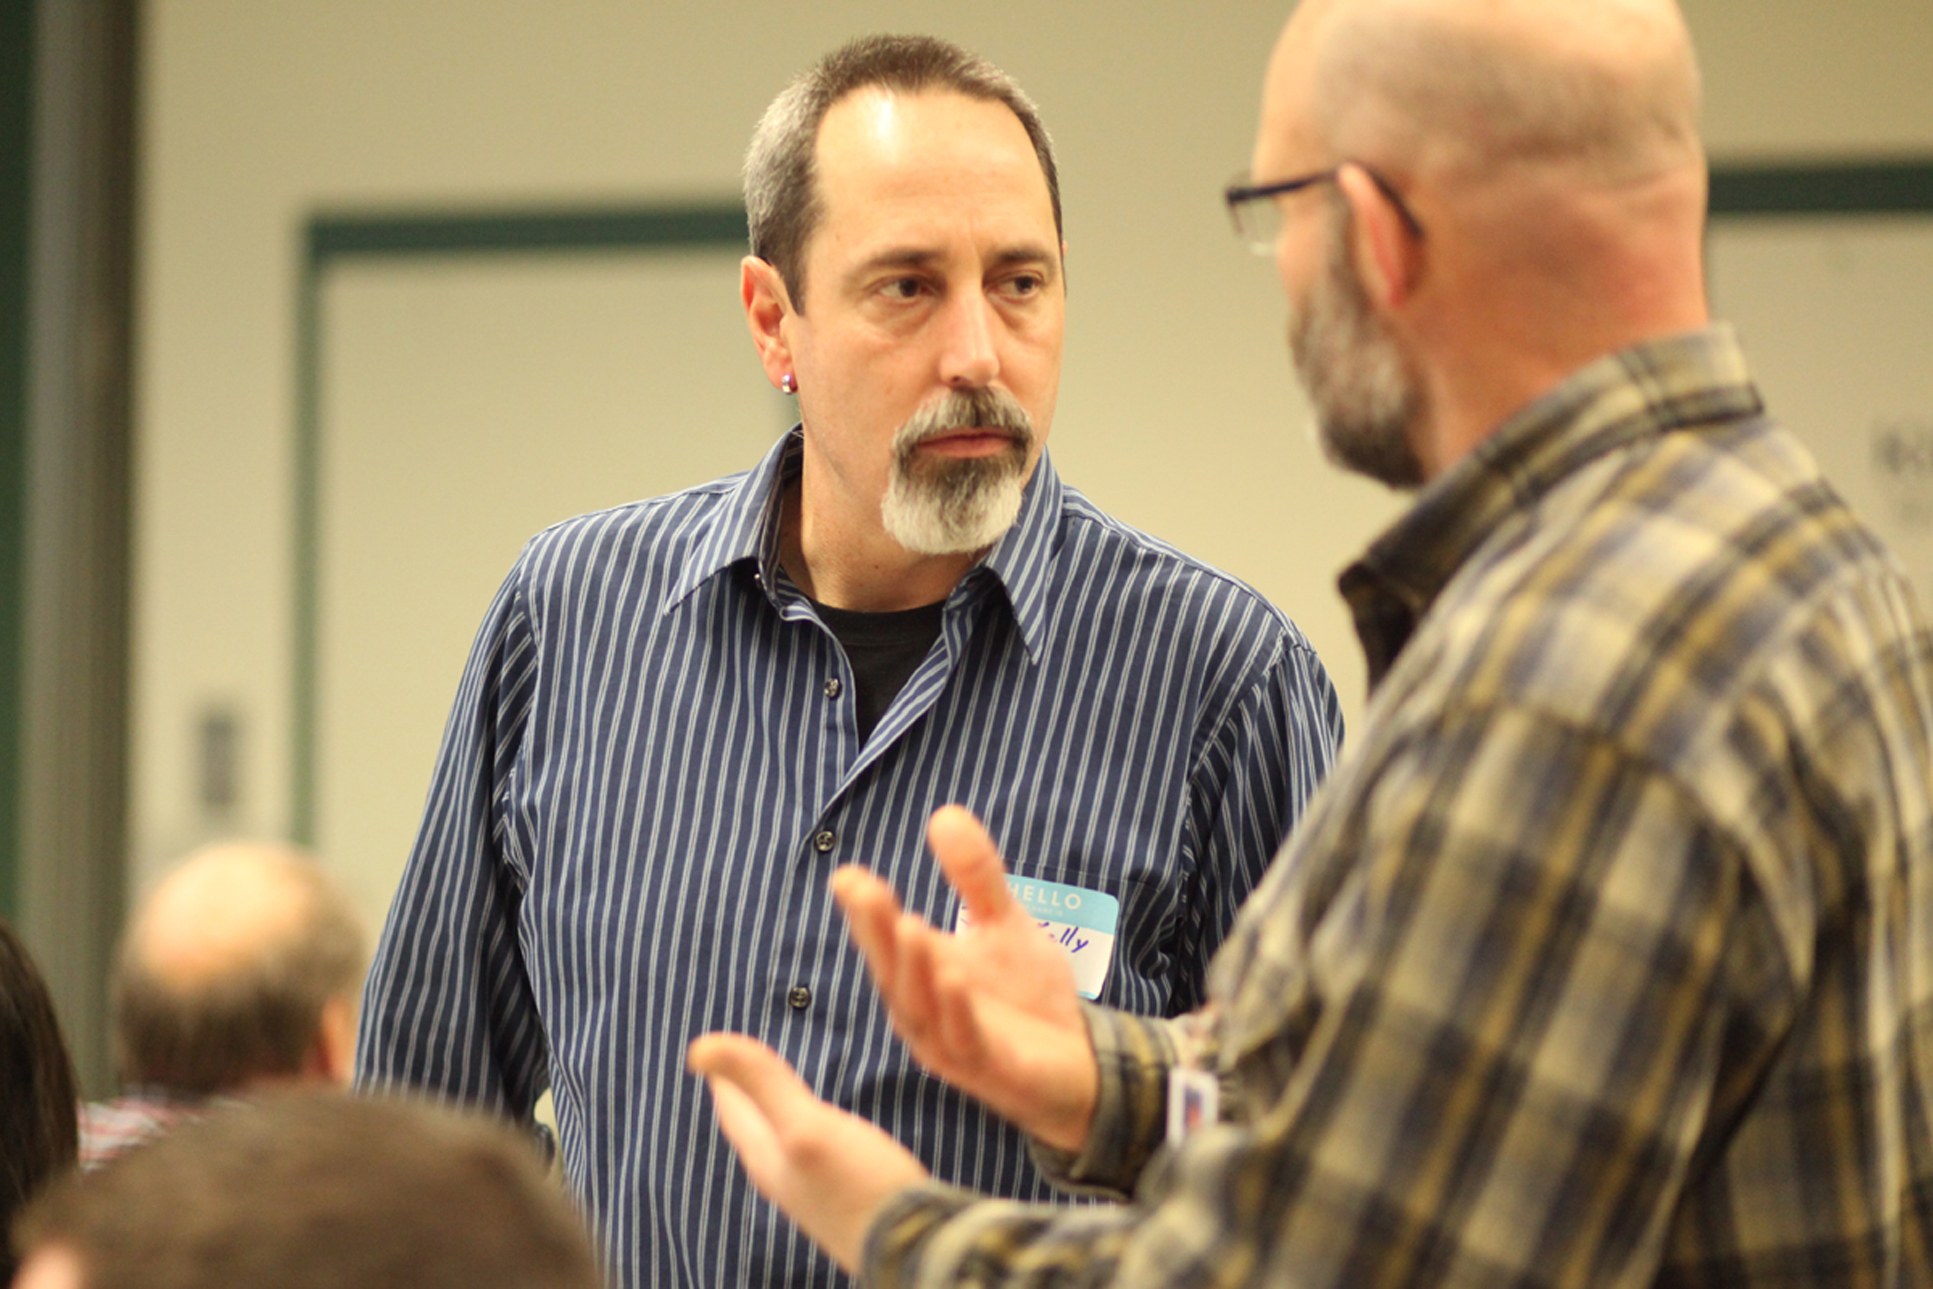 New Board of Education member John “Zen” Kelly spends his second day as District 9 representative at a meeting held by the school district that involved students, business owners, board members and school administrators.-Photo by Kelly Sullivan, Morris News Service - Alaska